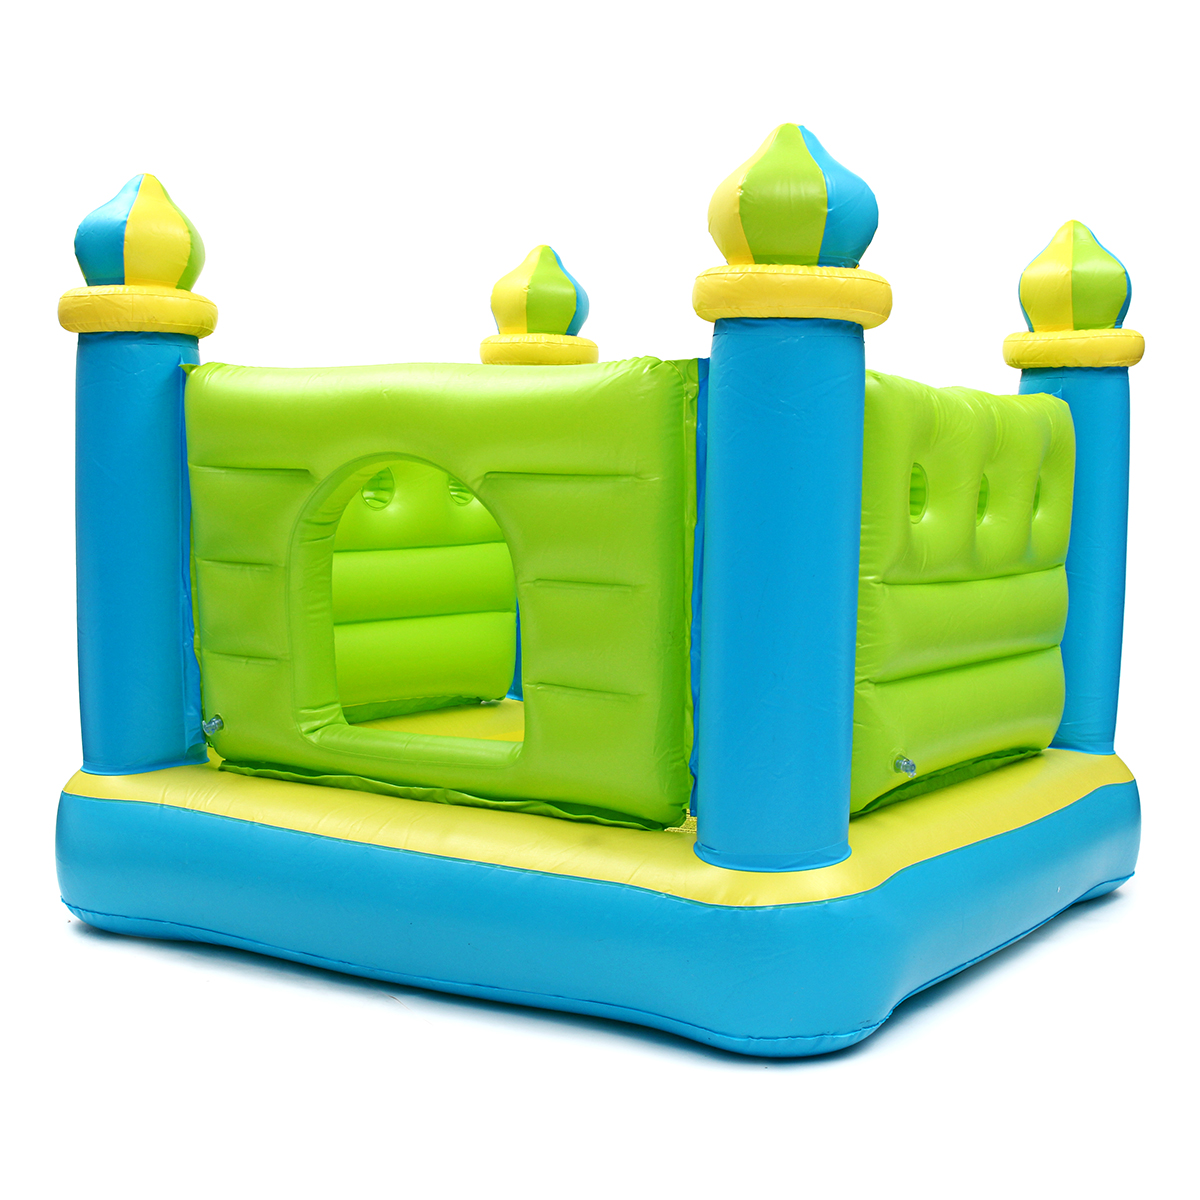 132cm132cm107cm-Inflatable-Toys-Bouncy-House-Castle-Commercial-Kids-Family-Indoor-Outdoor-Toy-1333569